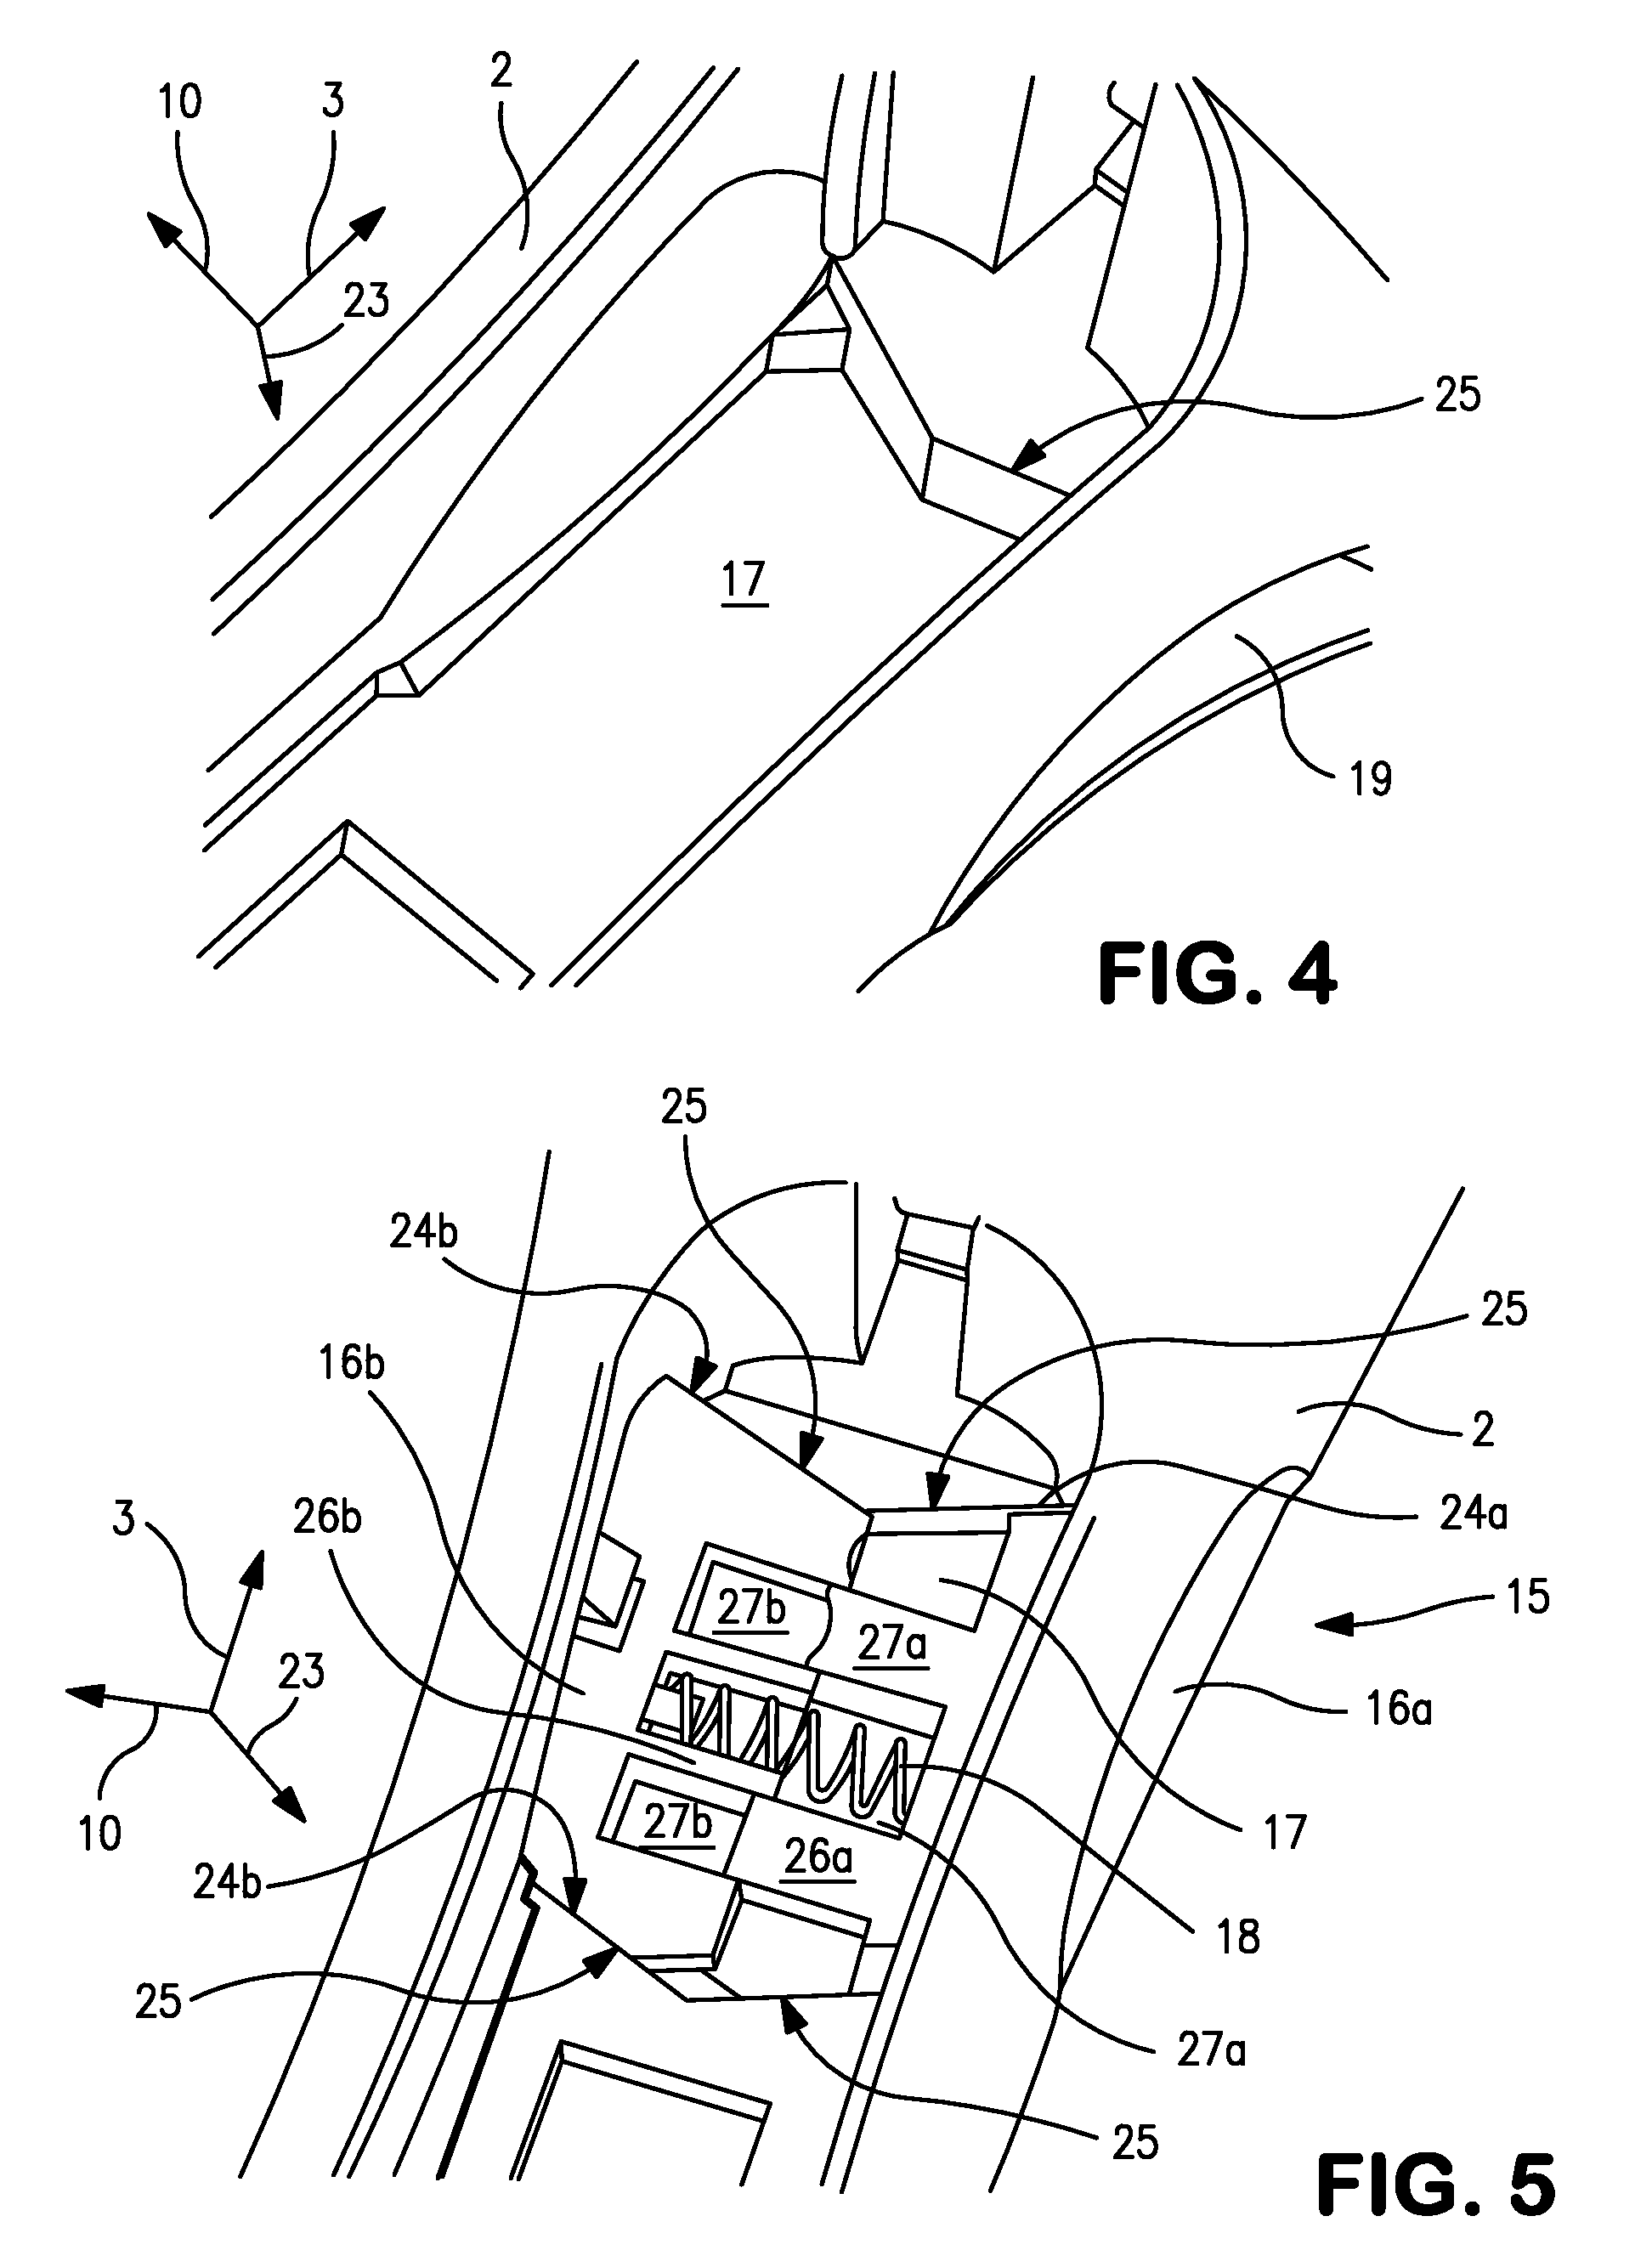 Detachable grip device having activation buttons for opening jaw-forming elements